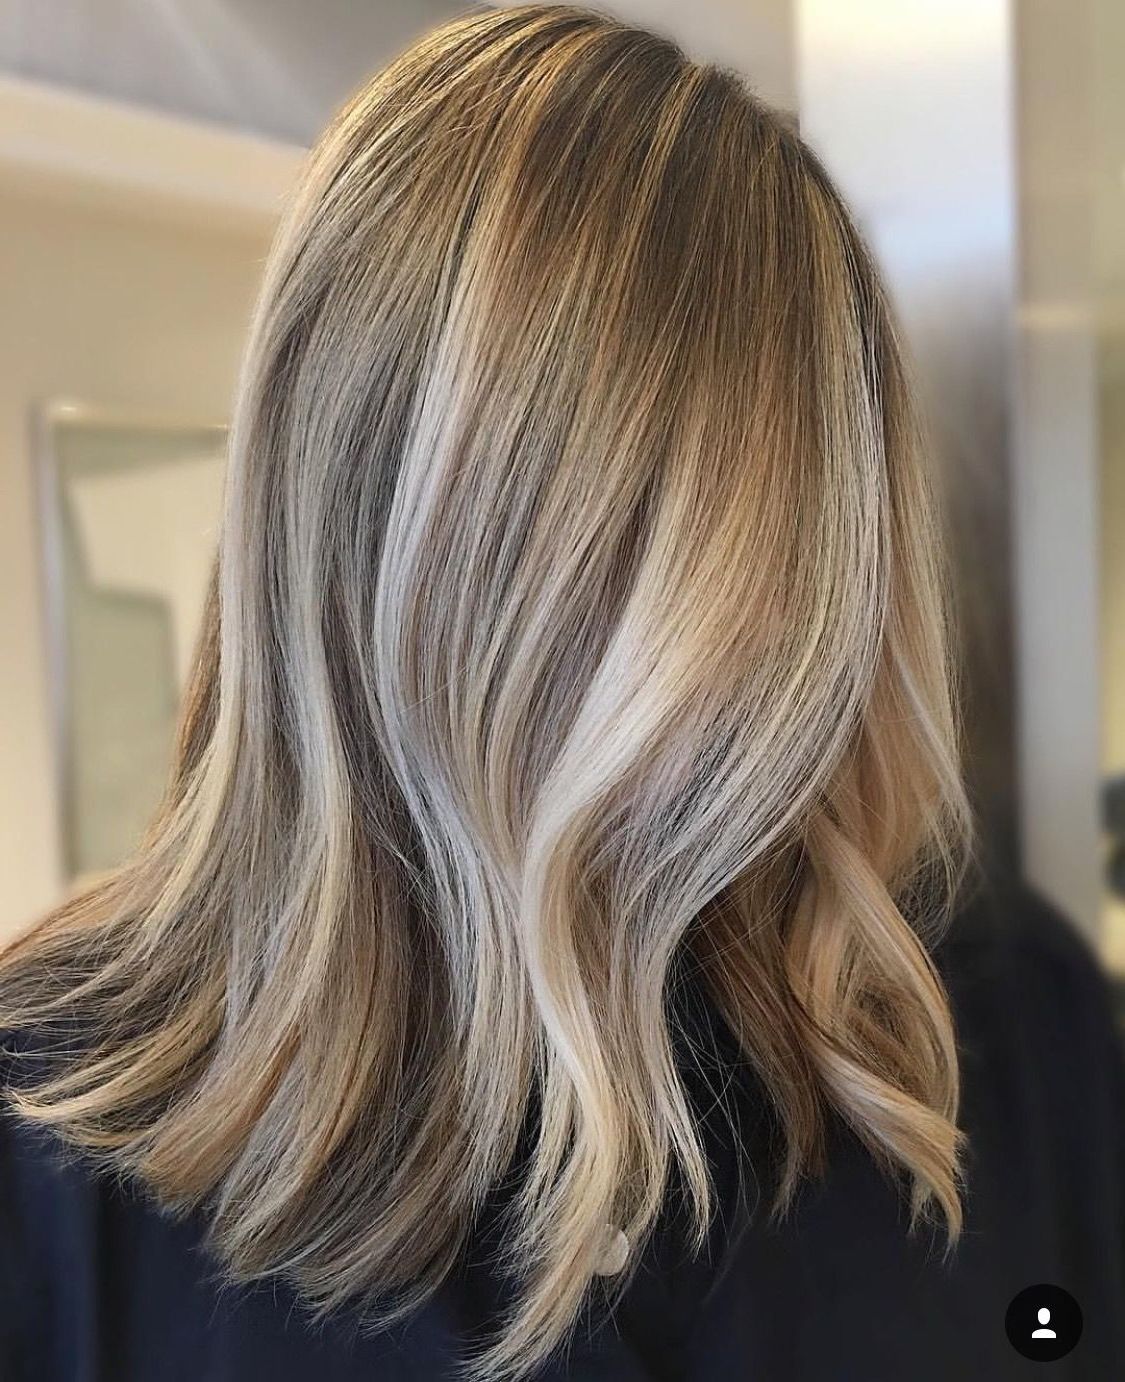 Dimensional Sandy Blonde Balayage! #blondehairstylesmedium For Shaggy Bob Hairstyles With Blonde Balayage (View 10 of 20)